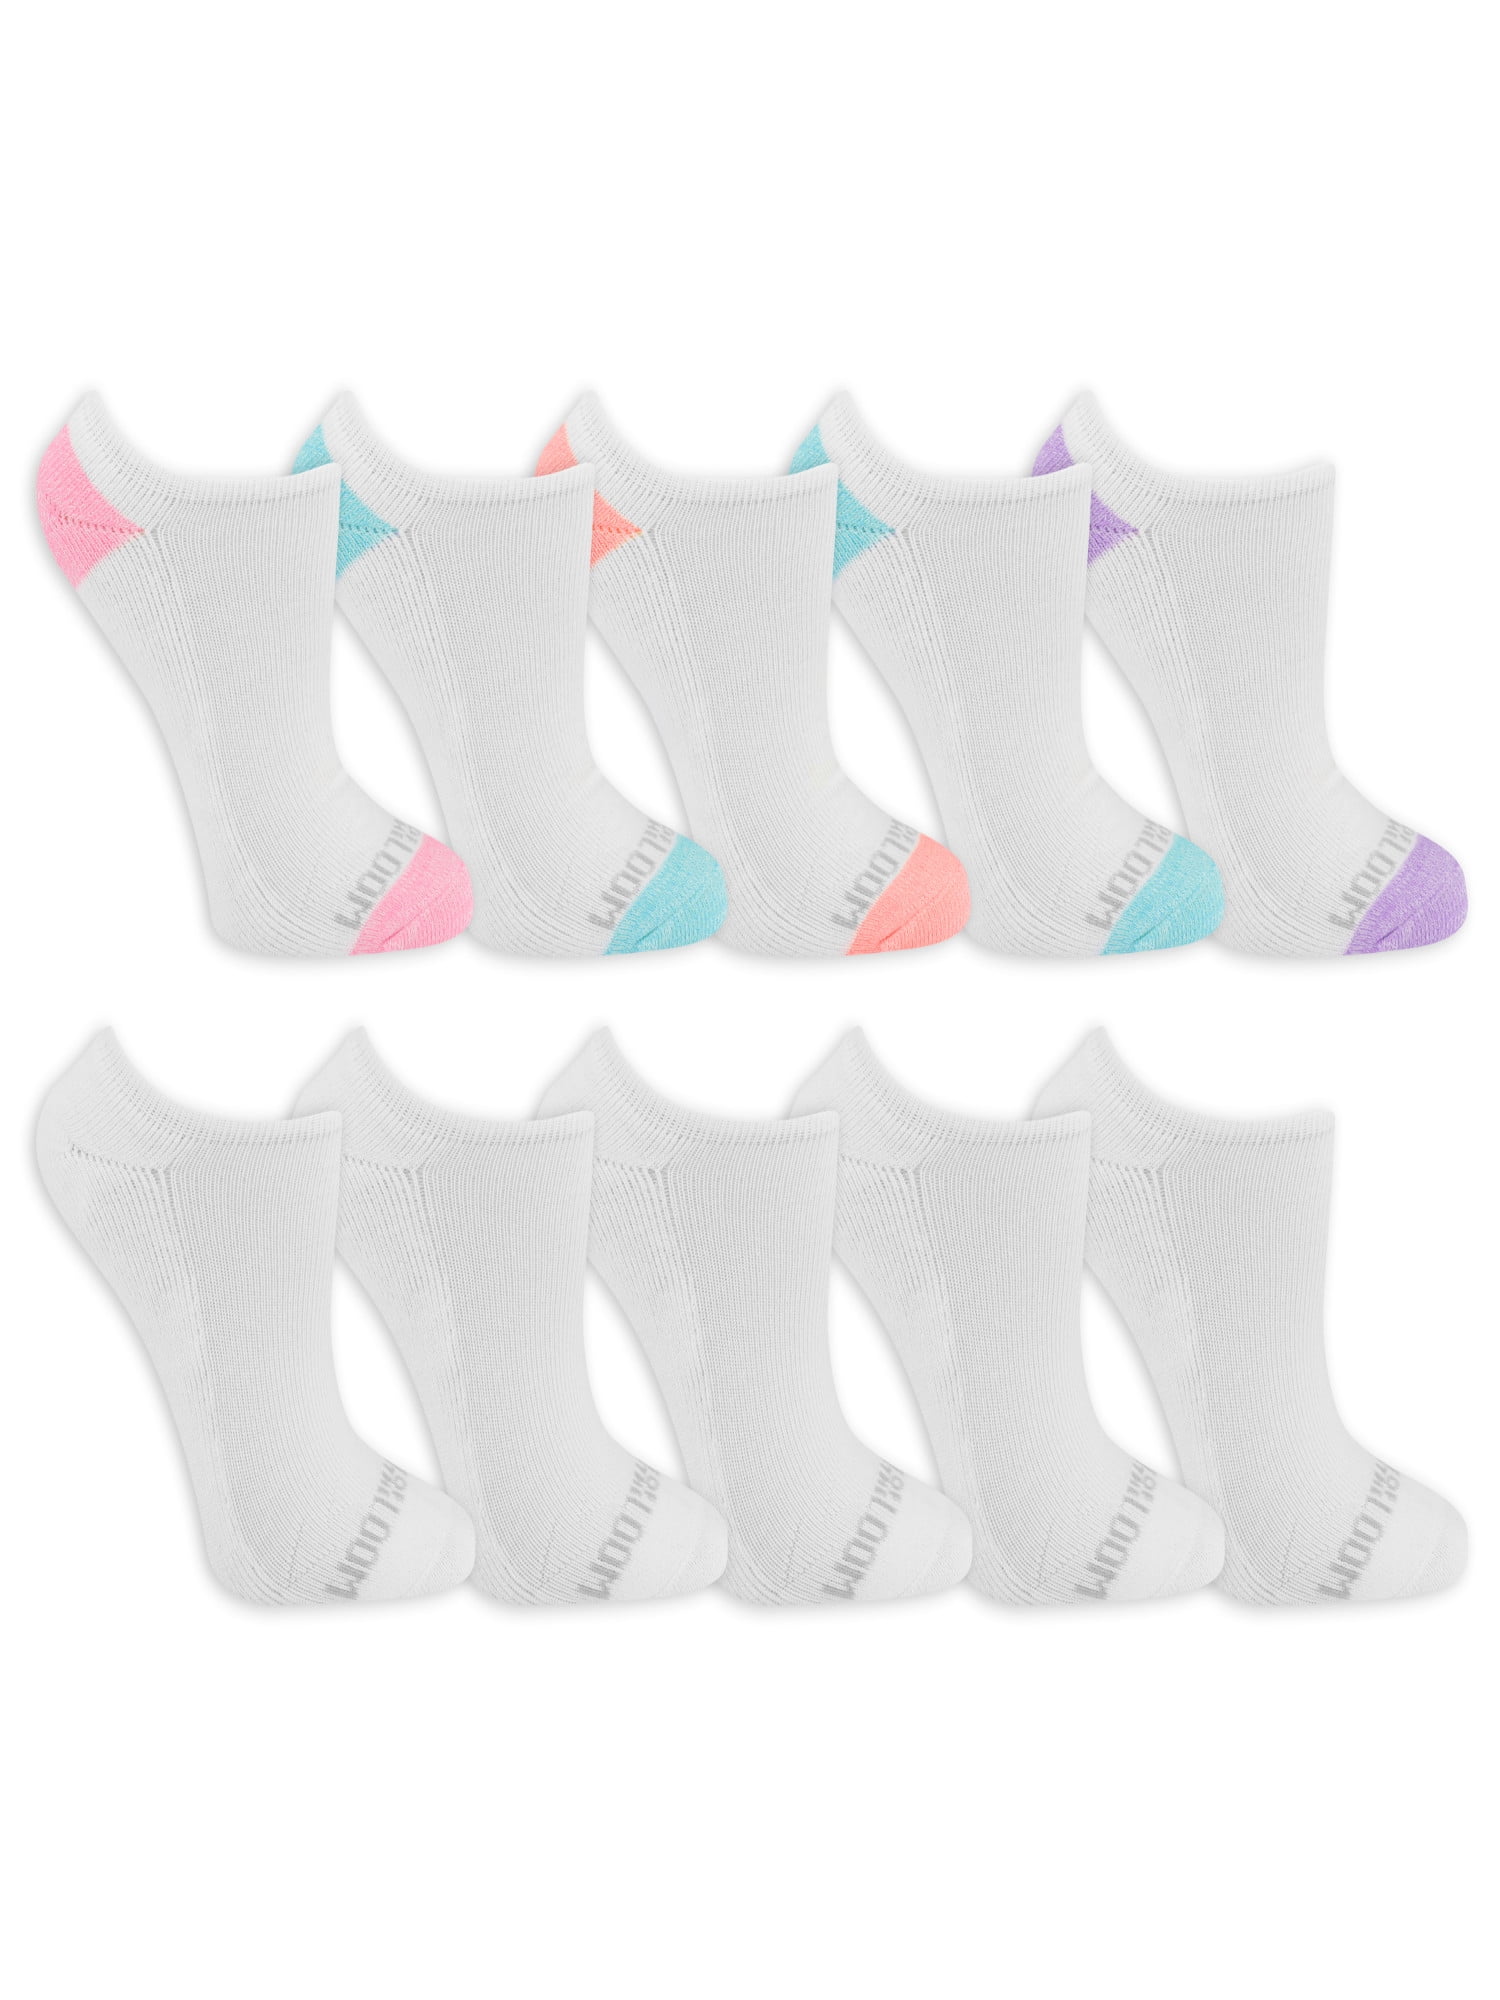 Marca Fruit of the LoomFruit of the Loom ragazze 10-pair No Show Socks calzino casual 